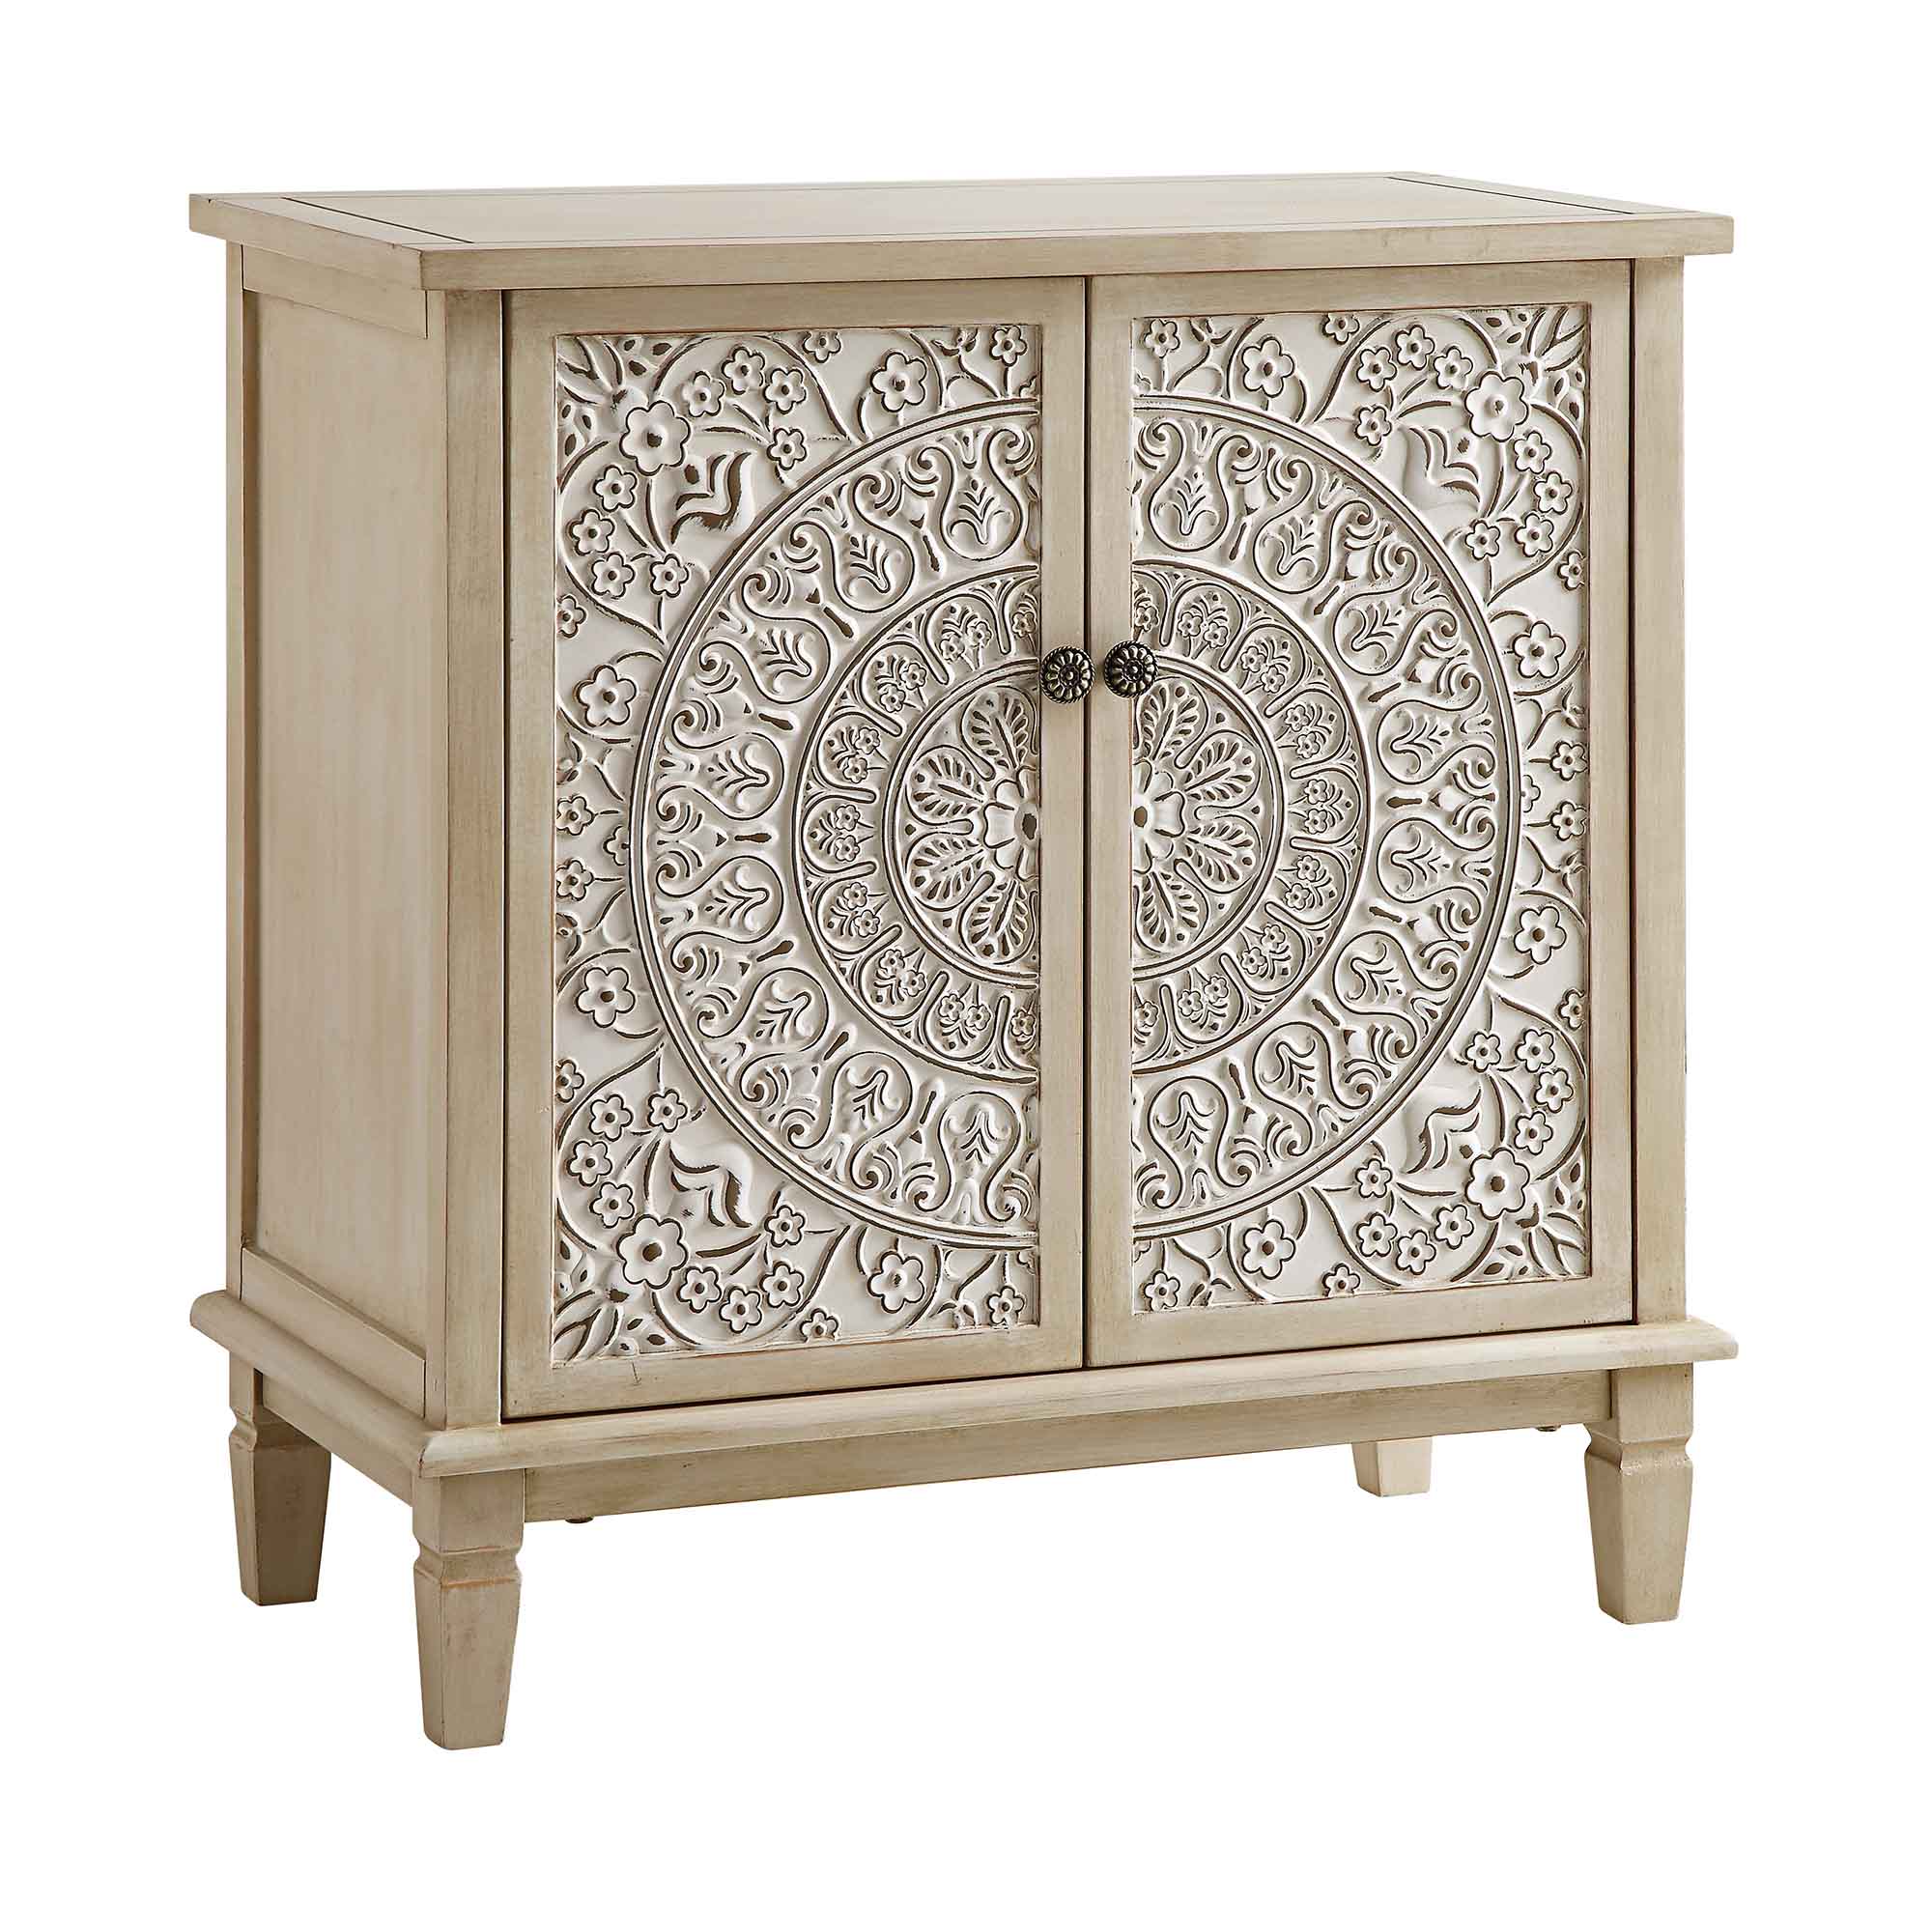 Chantilly Whitewashed Carved Small Sideboard